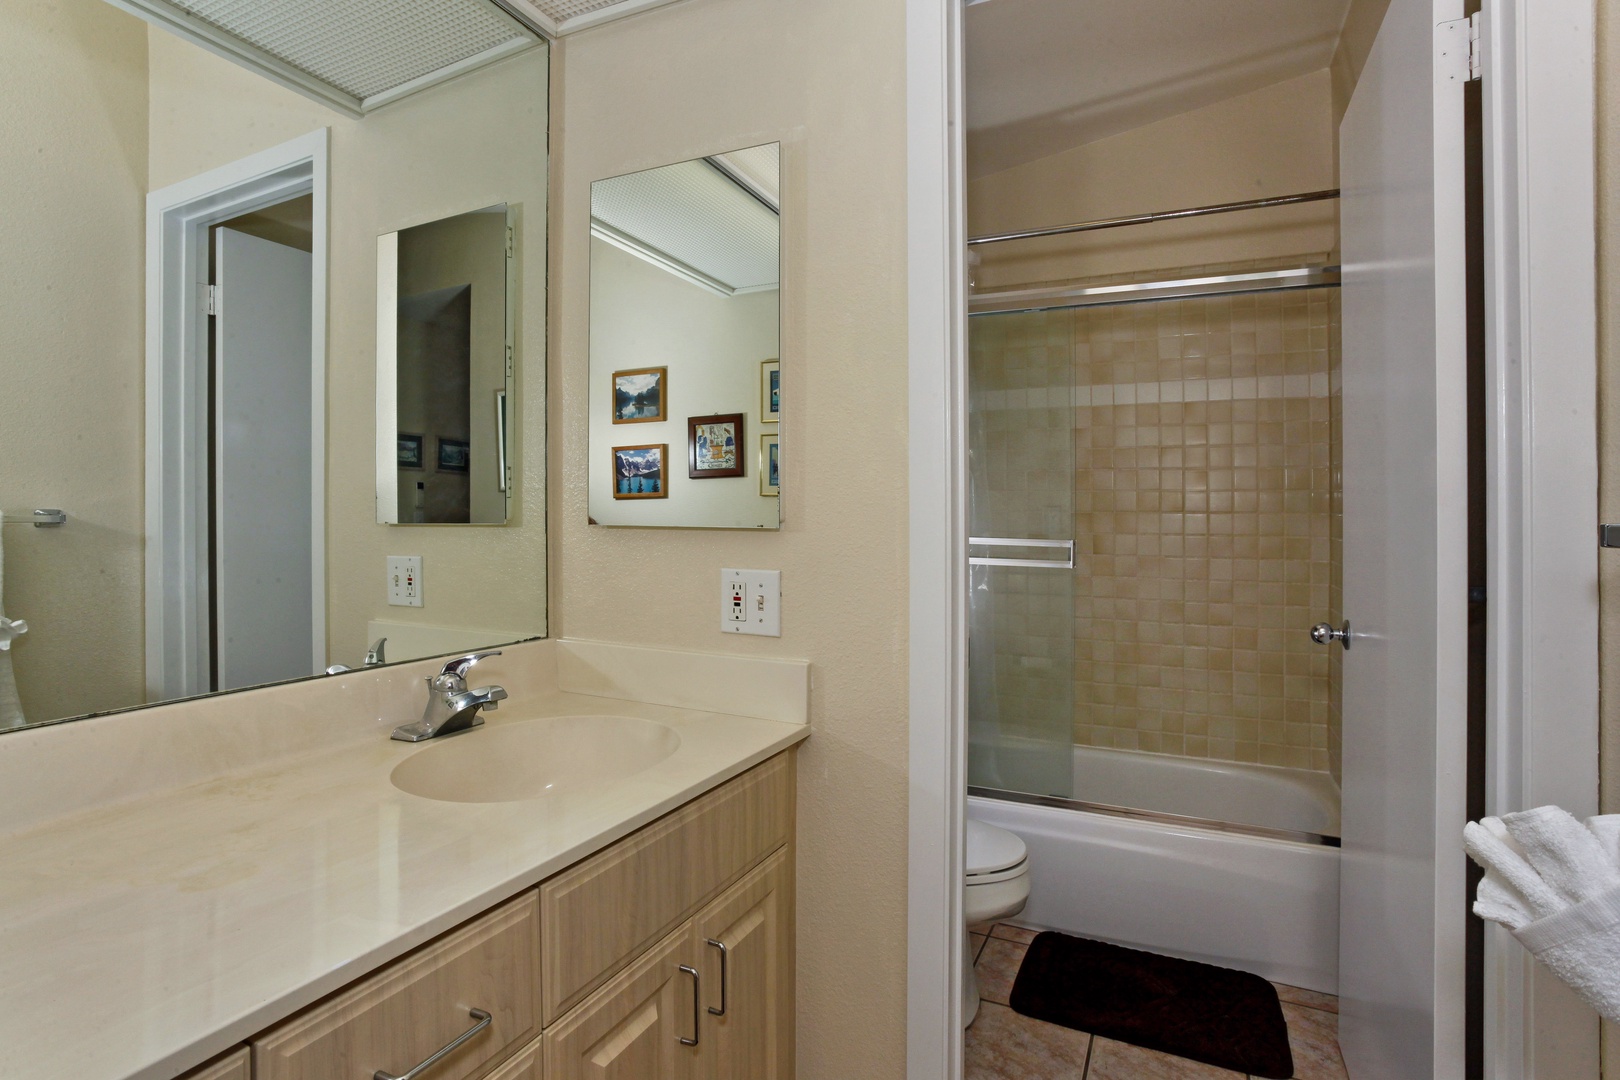 Kapolei Vacation Rentals, Fairways at Ko Olina 33F - The primary guest bathroom has a shower and tub combination.